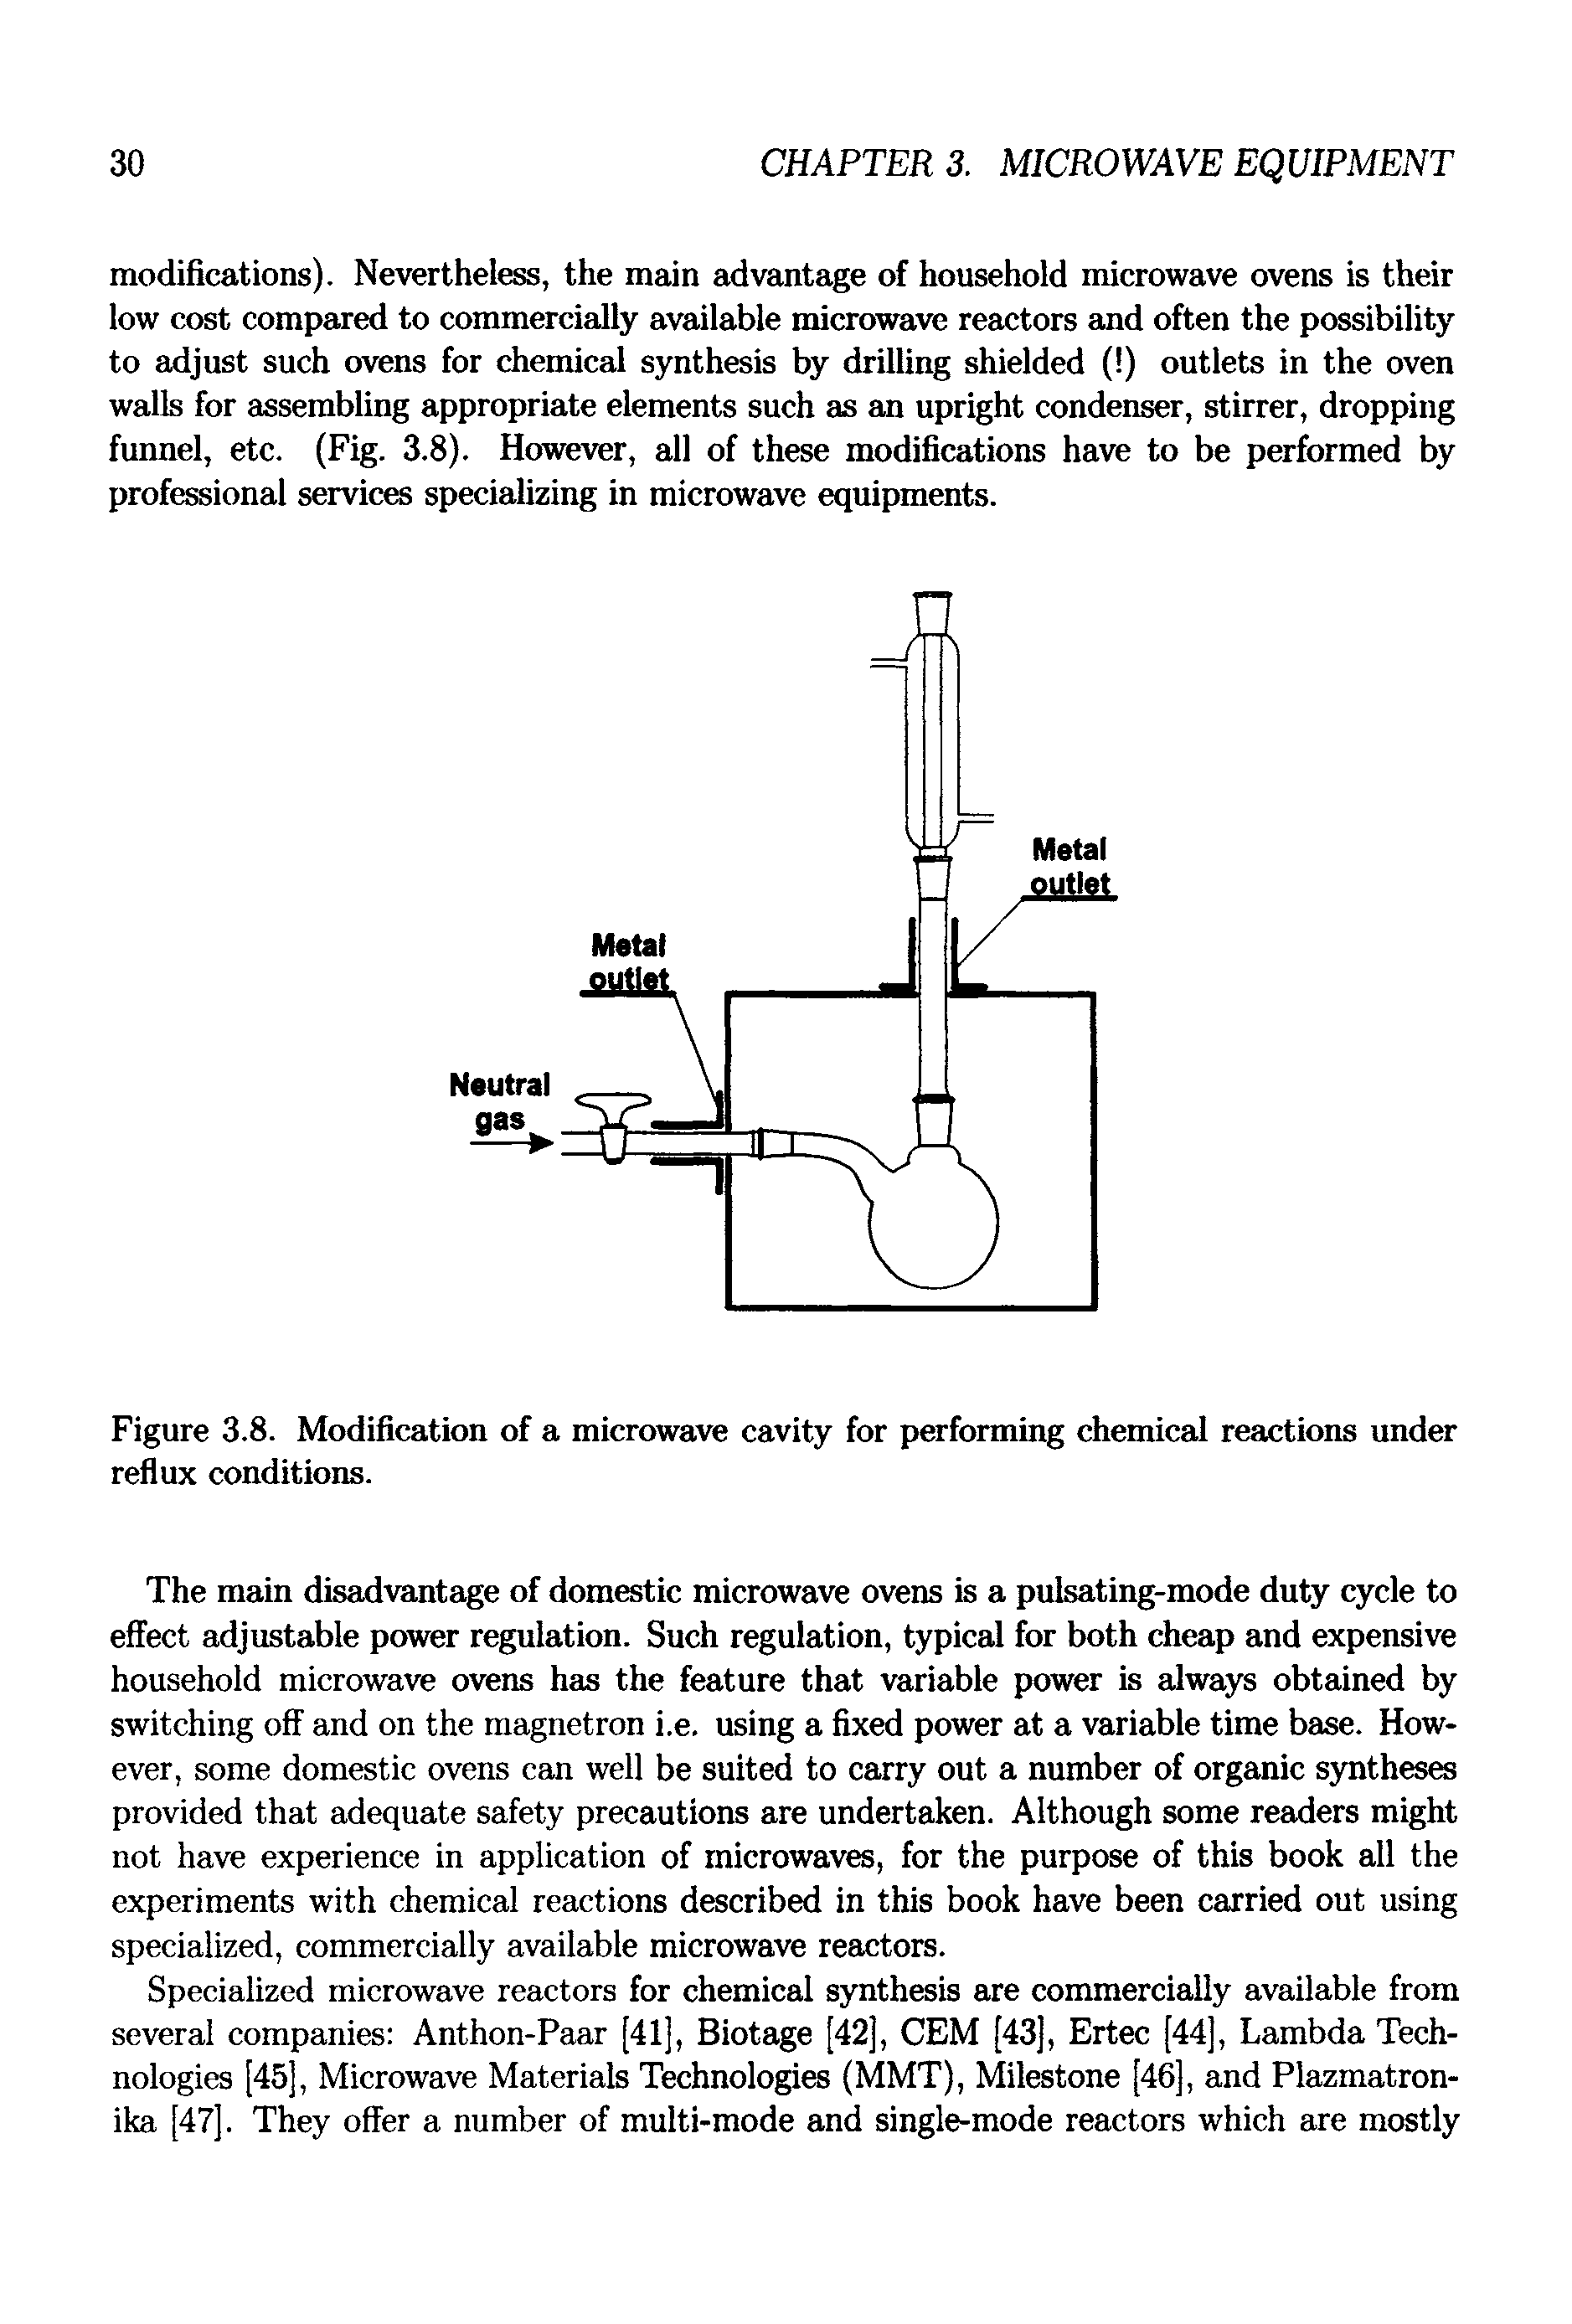 Figure 3.8. Modification of a microwave cavity for performing chemical reactions under reflux conditions.